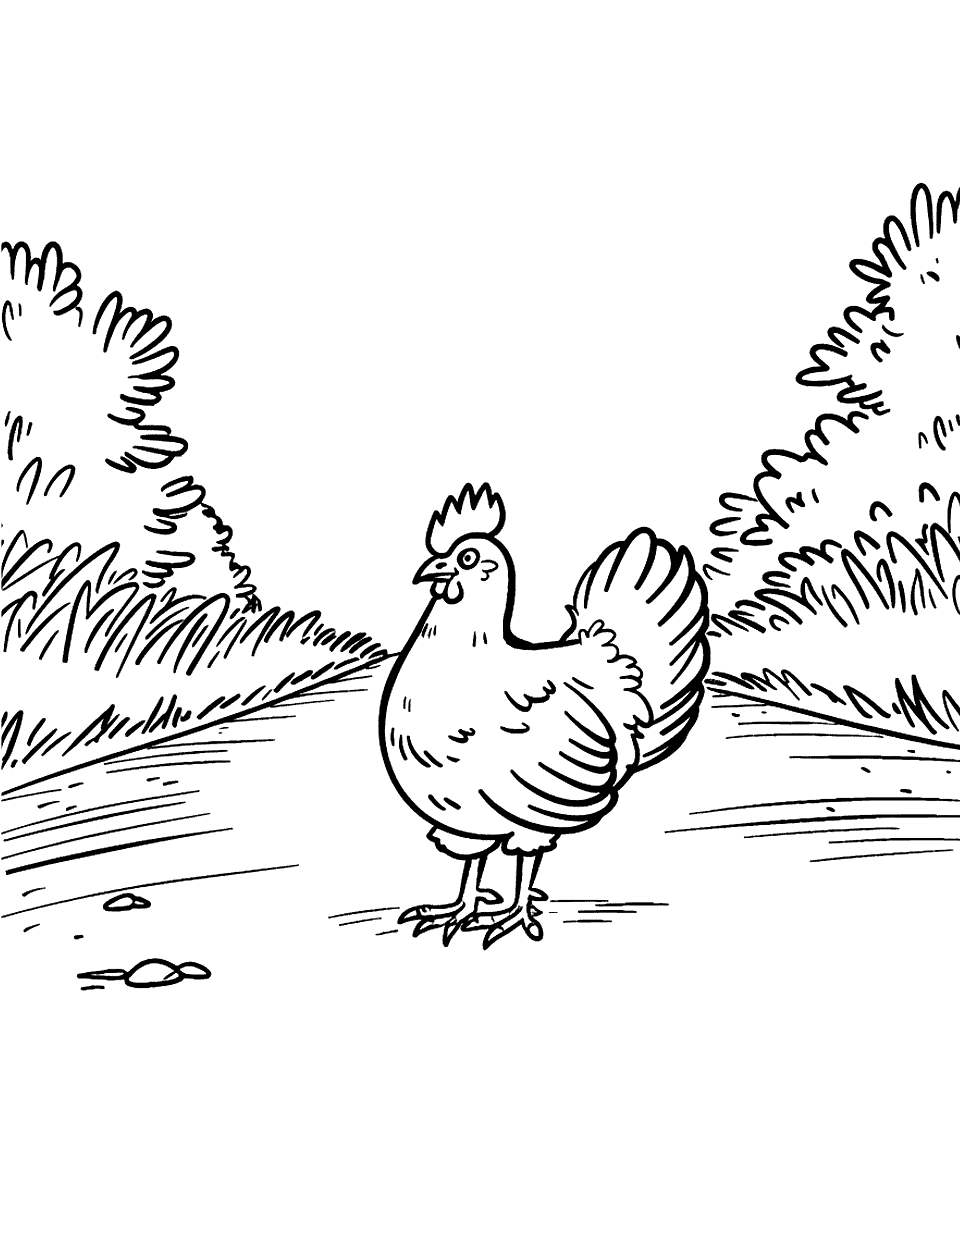 Chicken Crossing the Road Coloring Page - A humorous take on the classic joke, with a chicken cautiously crossing a simple road.